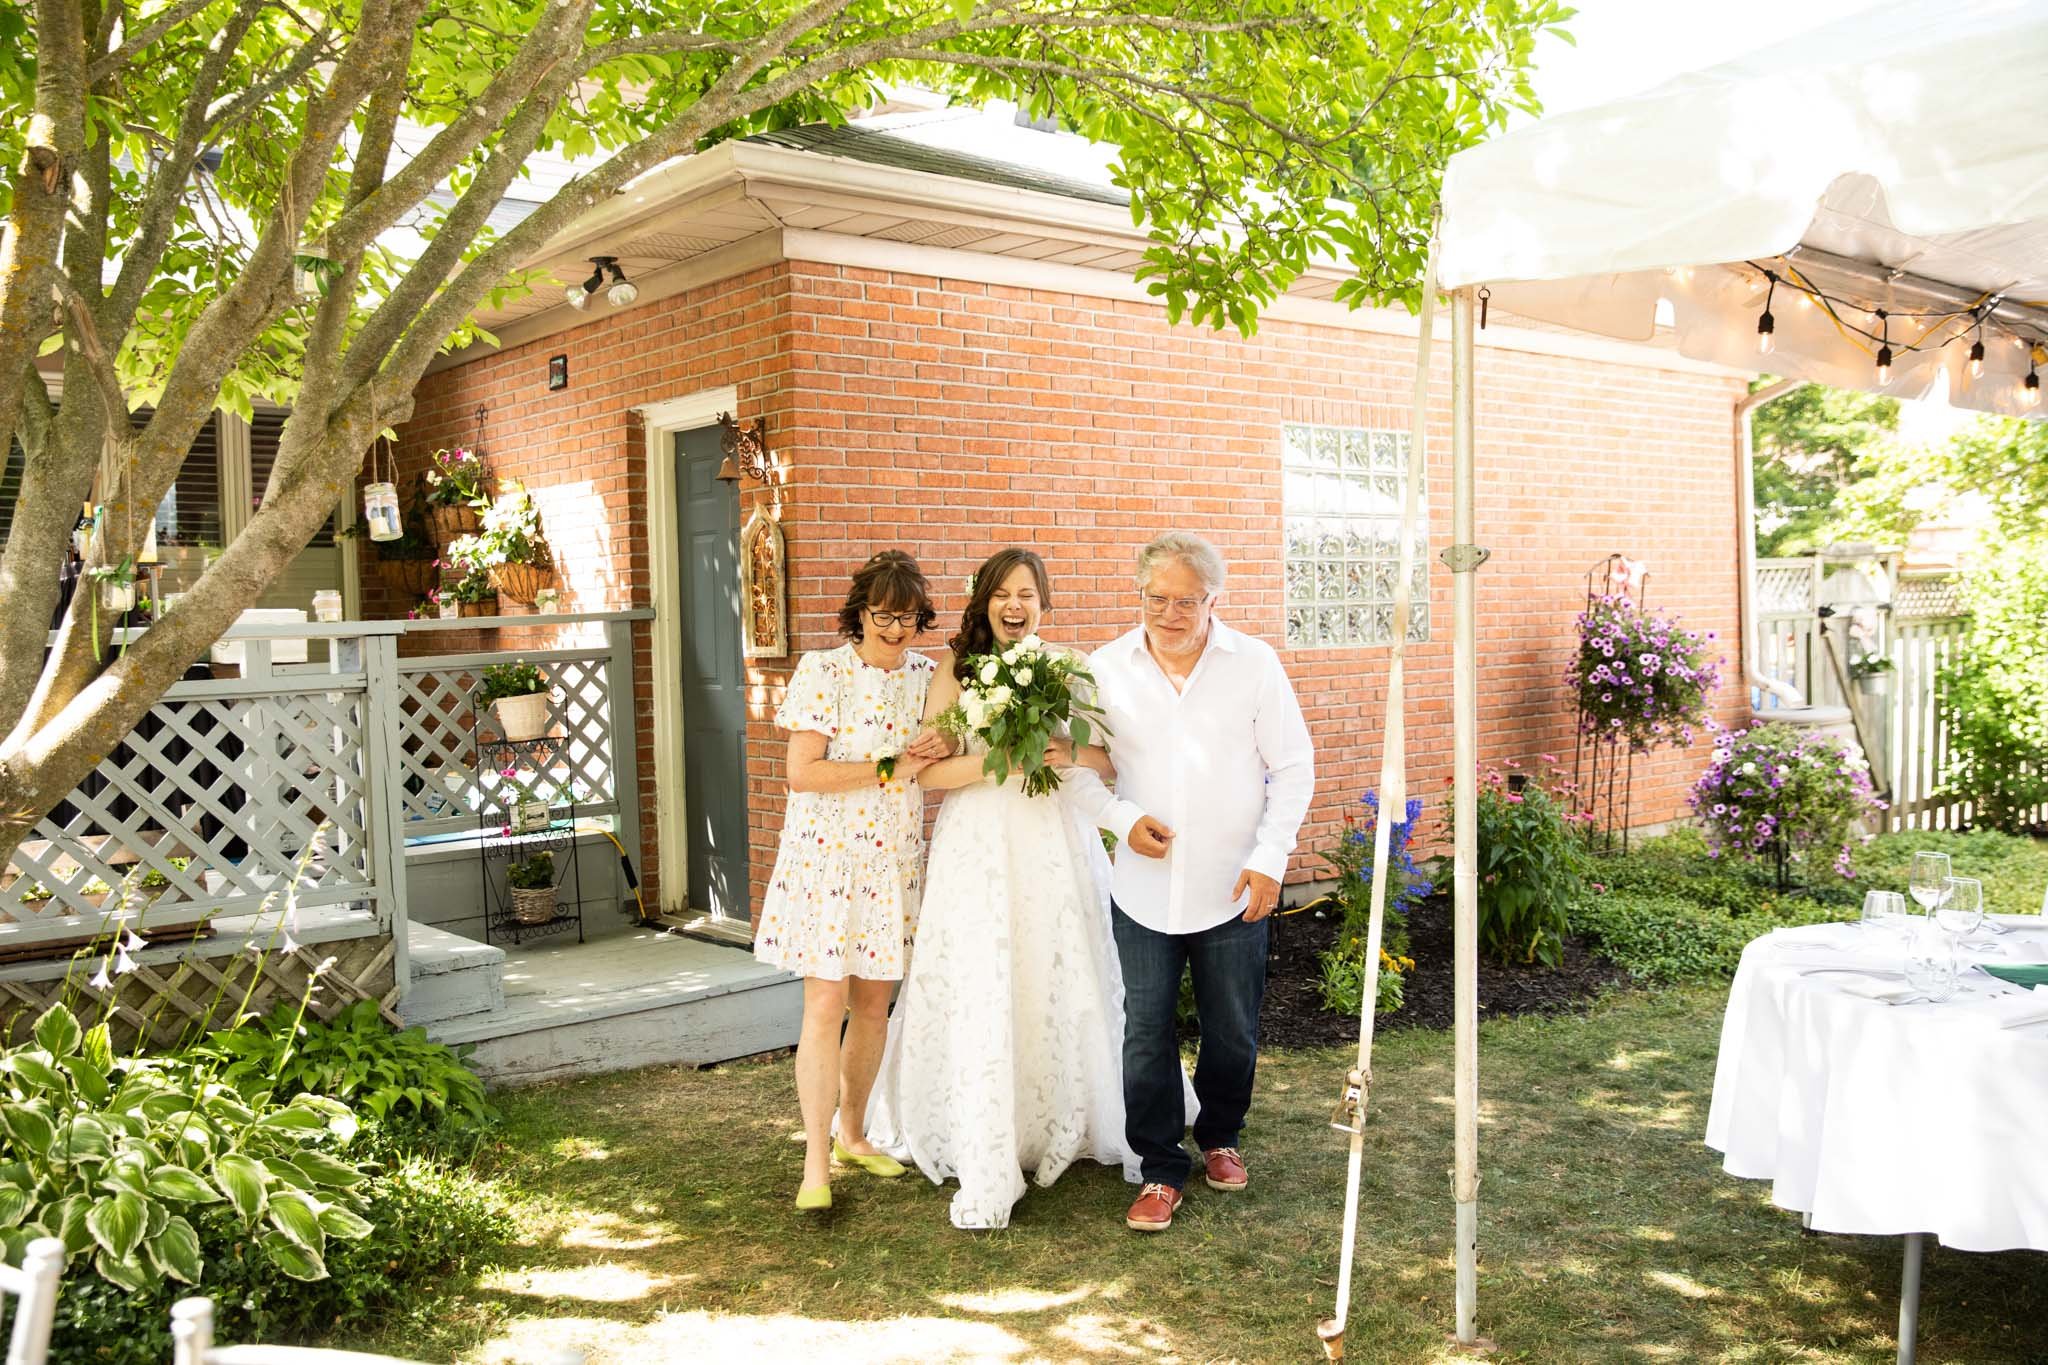 bride walking down the aisle with parents in backyard wedding.jpg